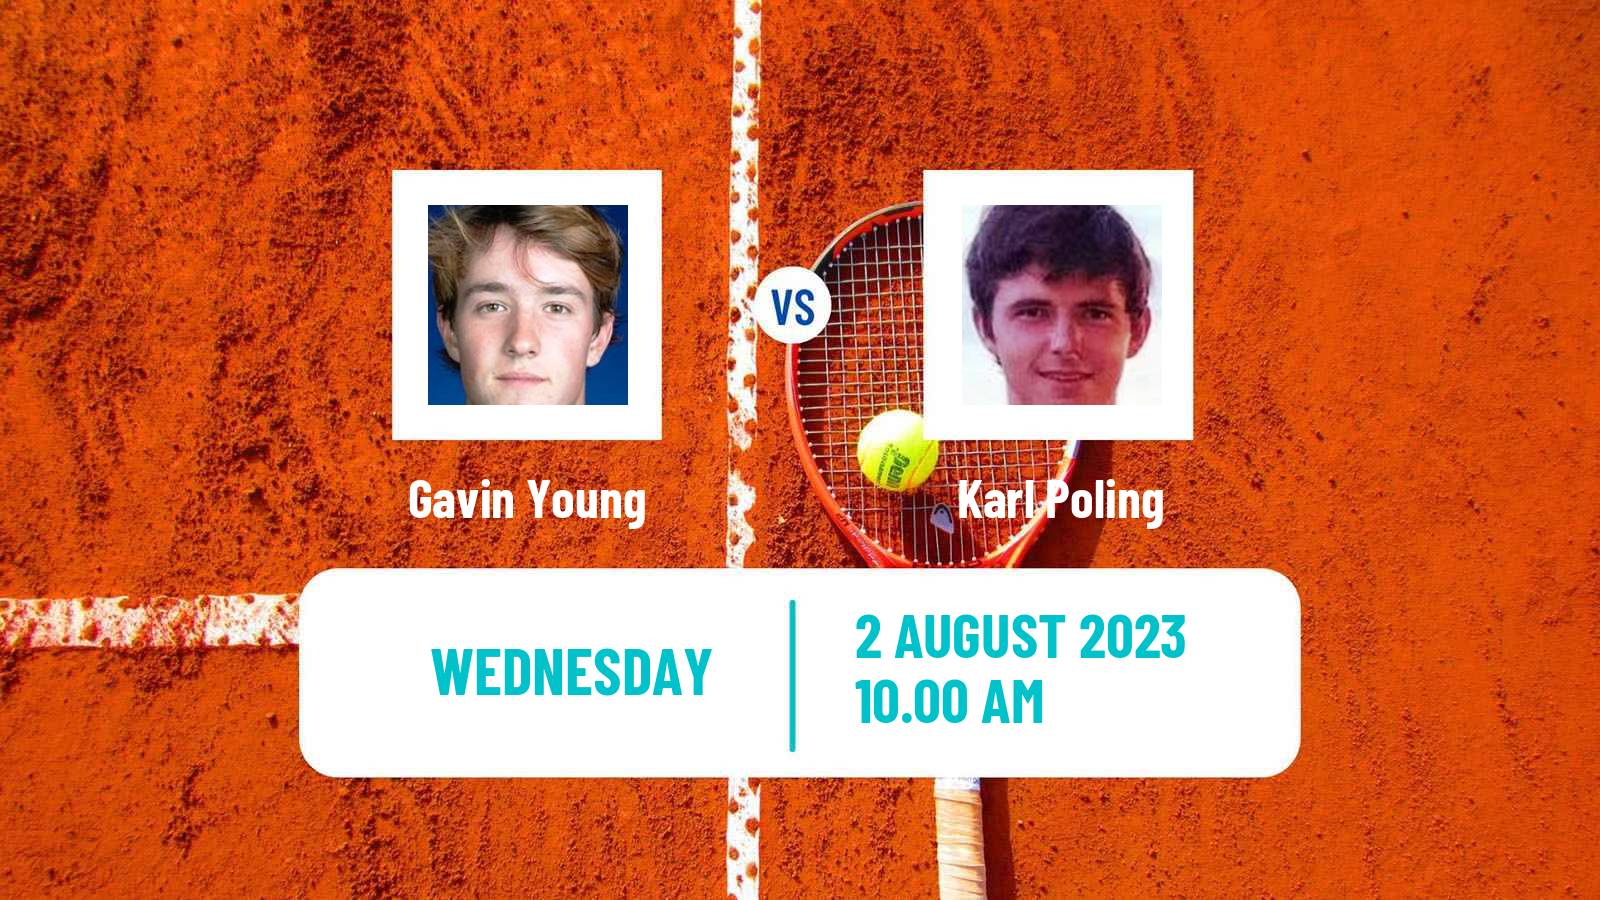 Tennis ITF M25 Decatur Il Men Gavin Young - Karl Poling